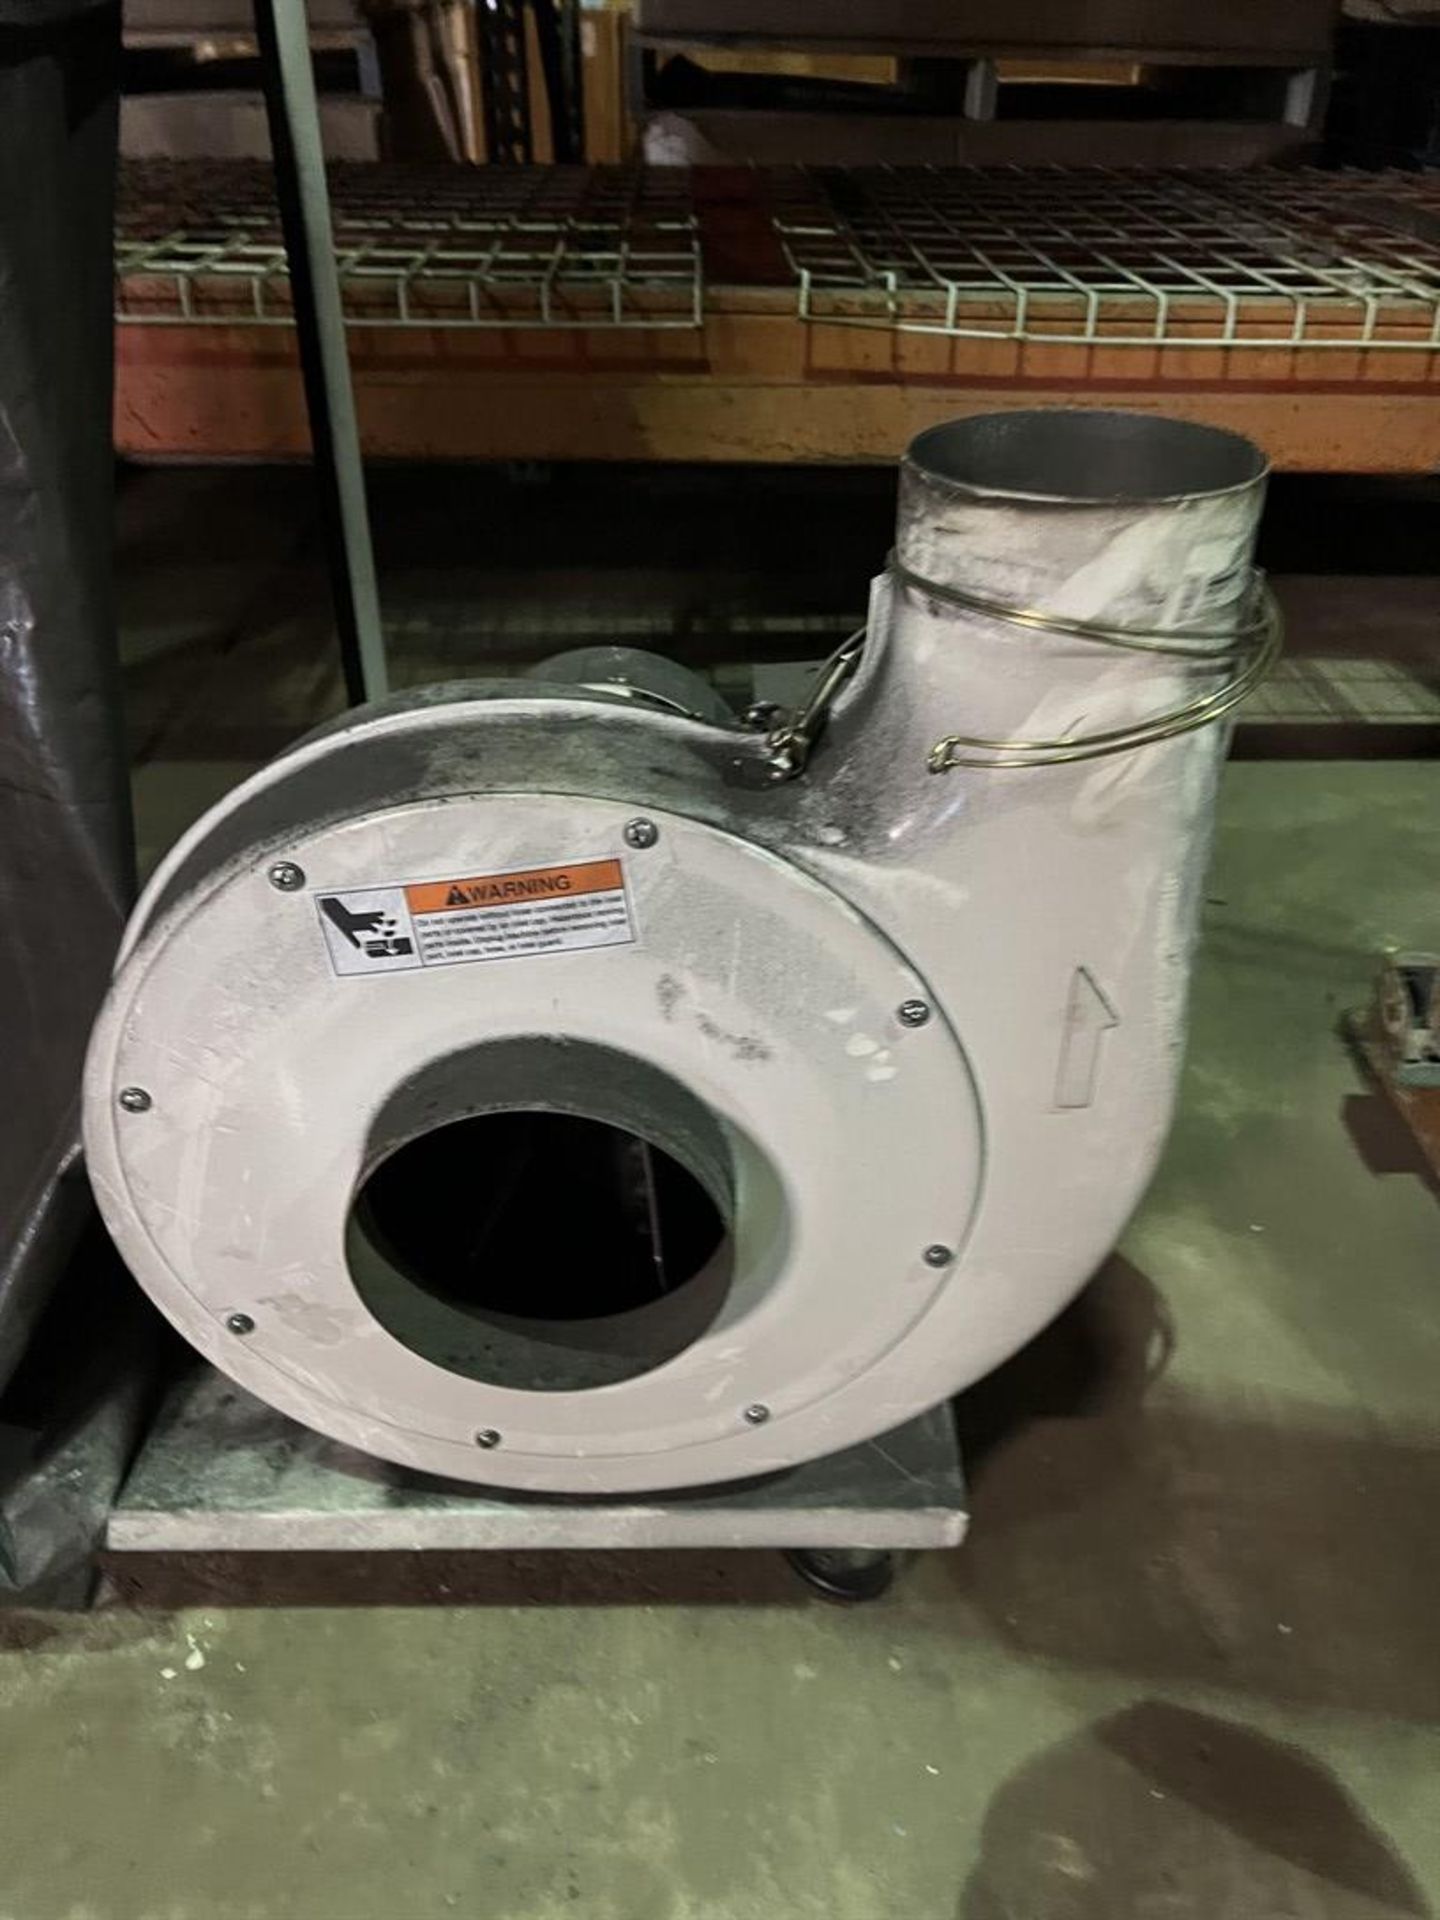 JET DC-1200VX Vortex Cone Dust Collector, s/n 19090625, 2 HP (Building 39) - Image 3 of 6